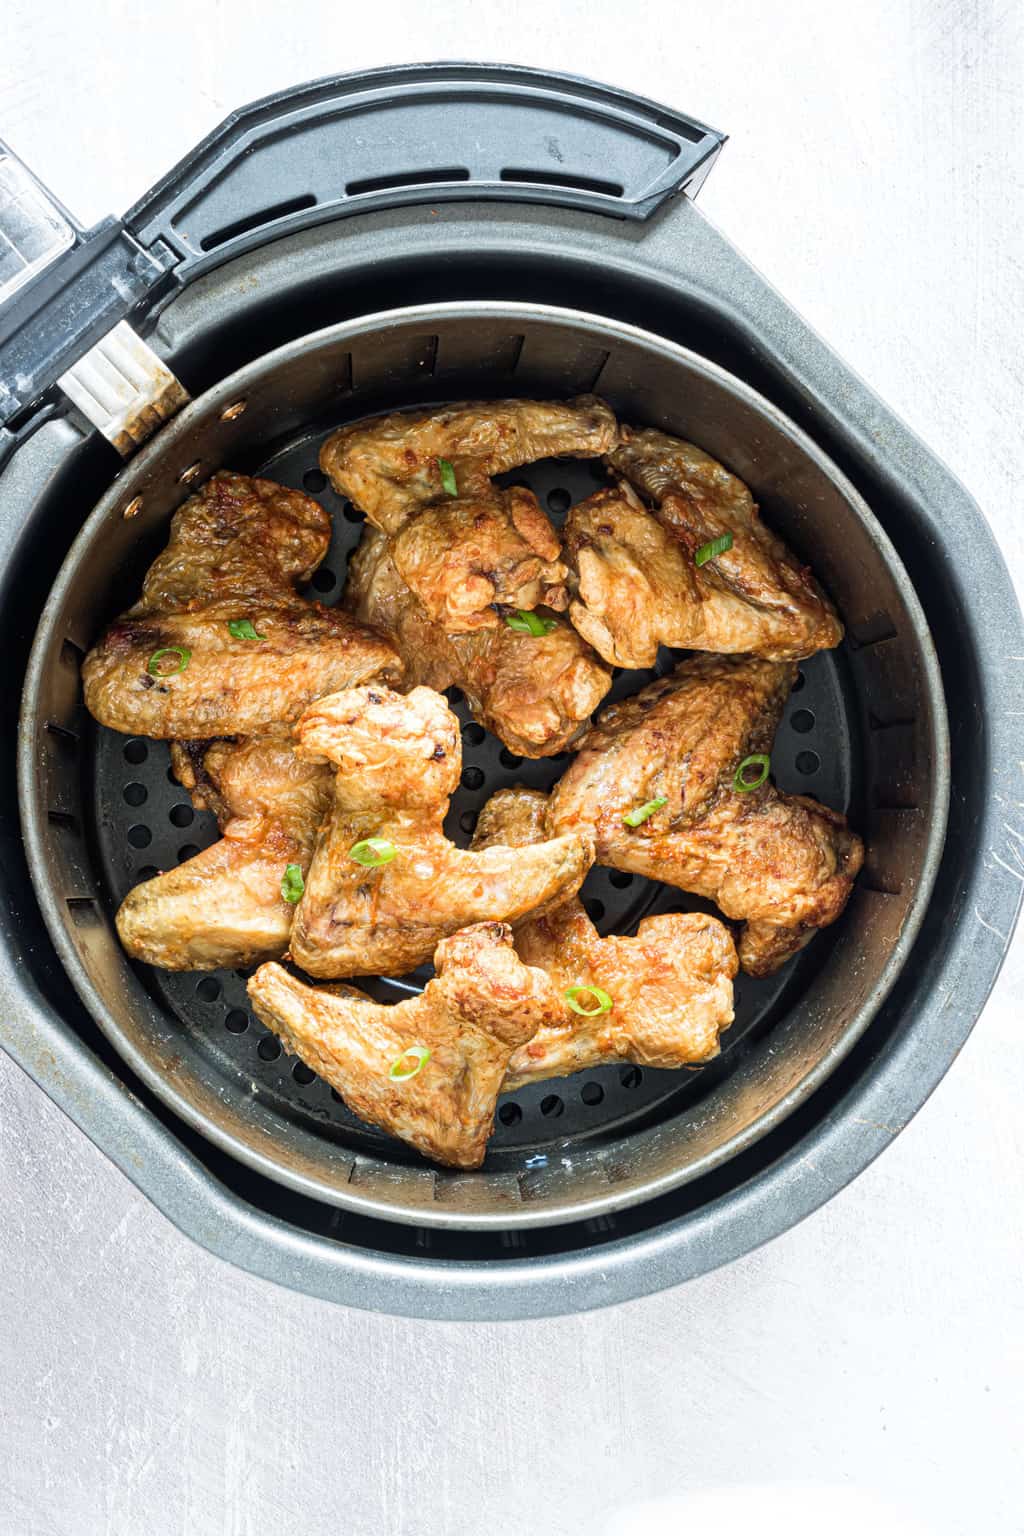 top down view of cooked chicken wings inside the air fryer basket